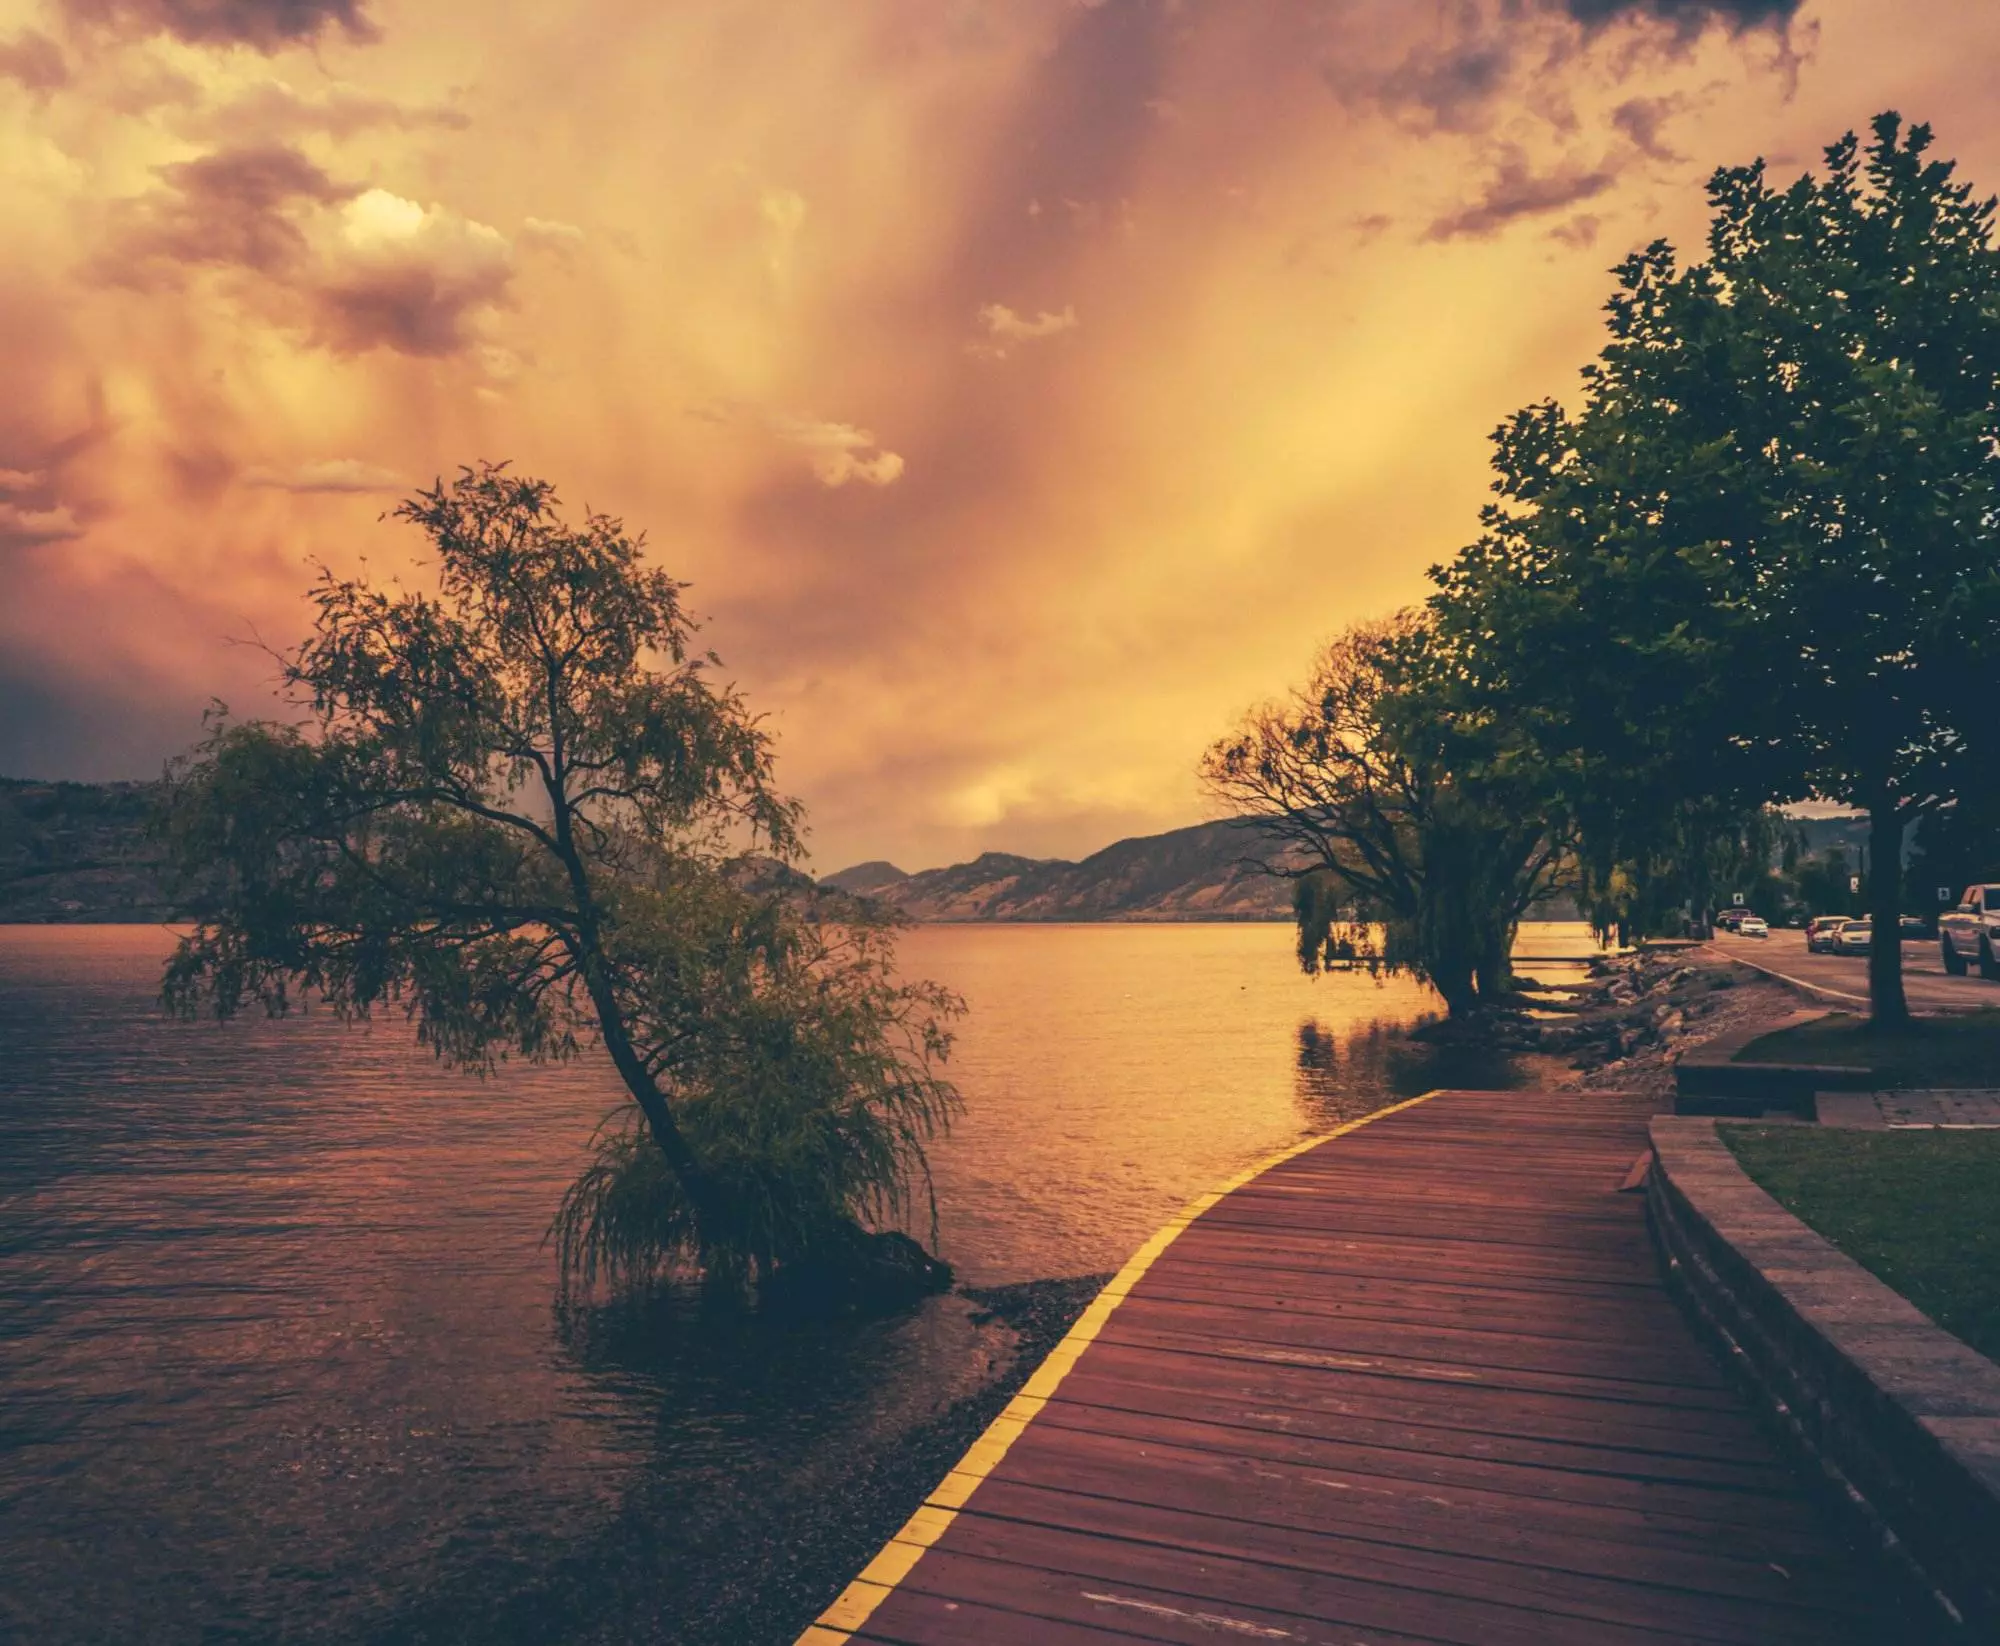 The Beautiful Okanagan Lake with a wooden trail alongside Peachland at sunset.